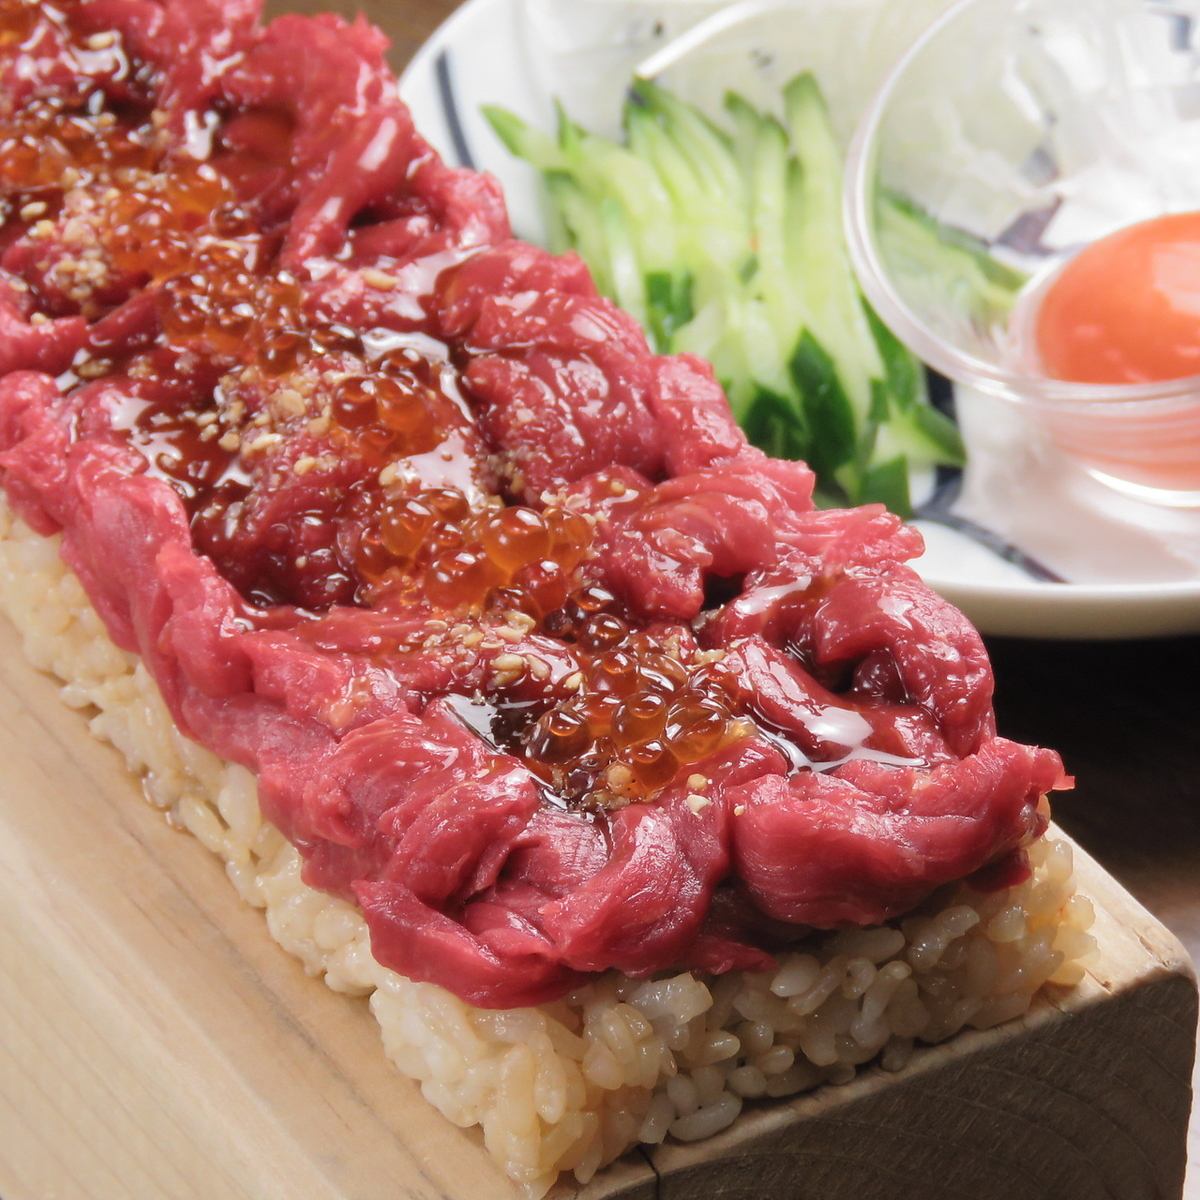 Kashiwa store's famous "Yukhoe Sushi with Cherry Blossom Meat" is very filling!! It looks great in photos too!!